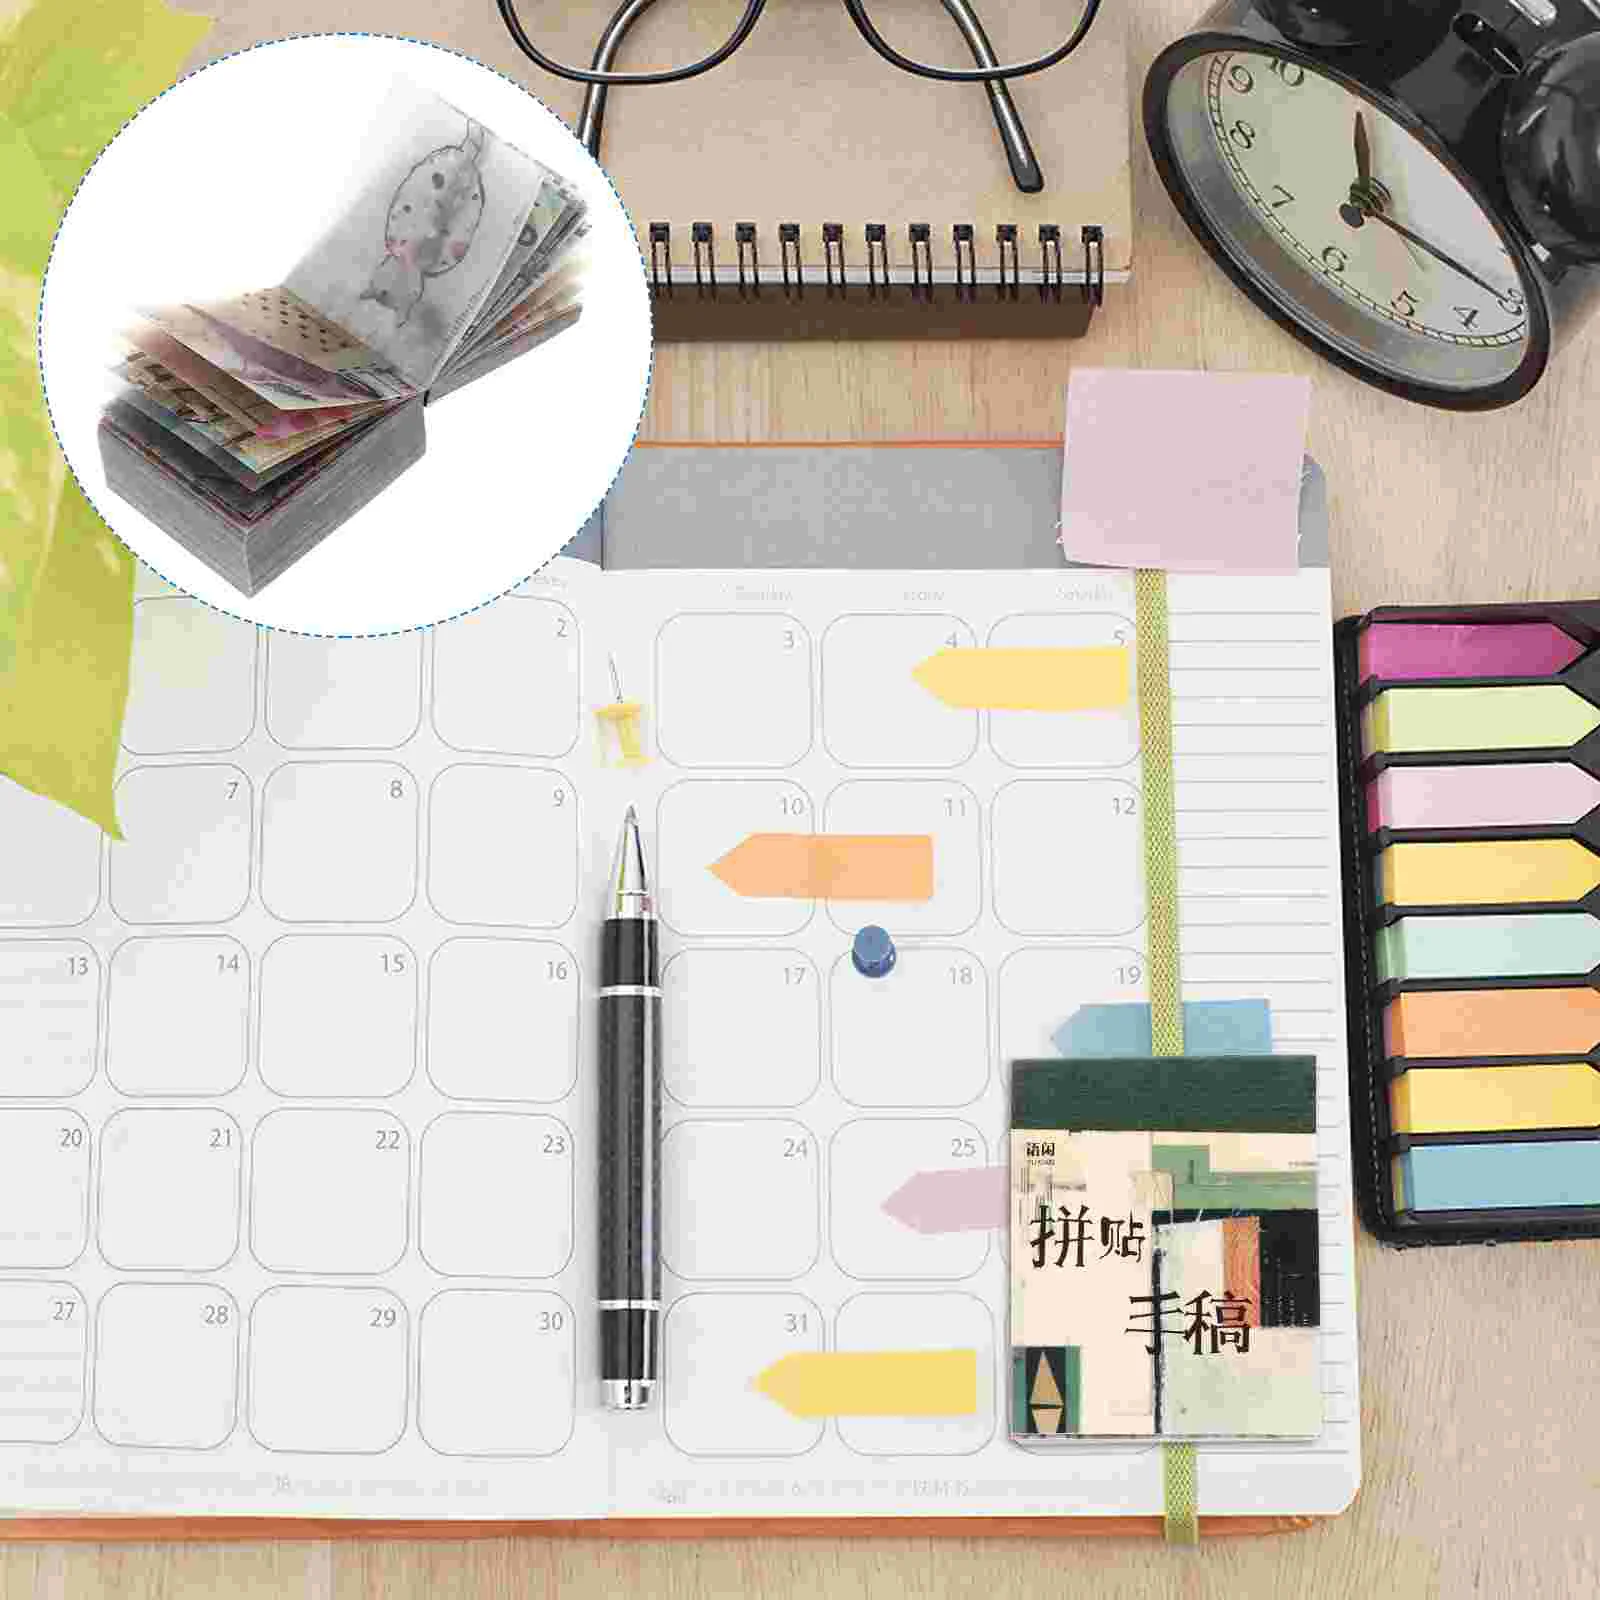 

365 Sheets Material Book Journal Craft Papers Letter Stickers Laptop Mini Supplies Wrapping